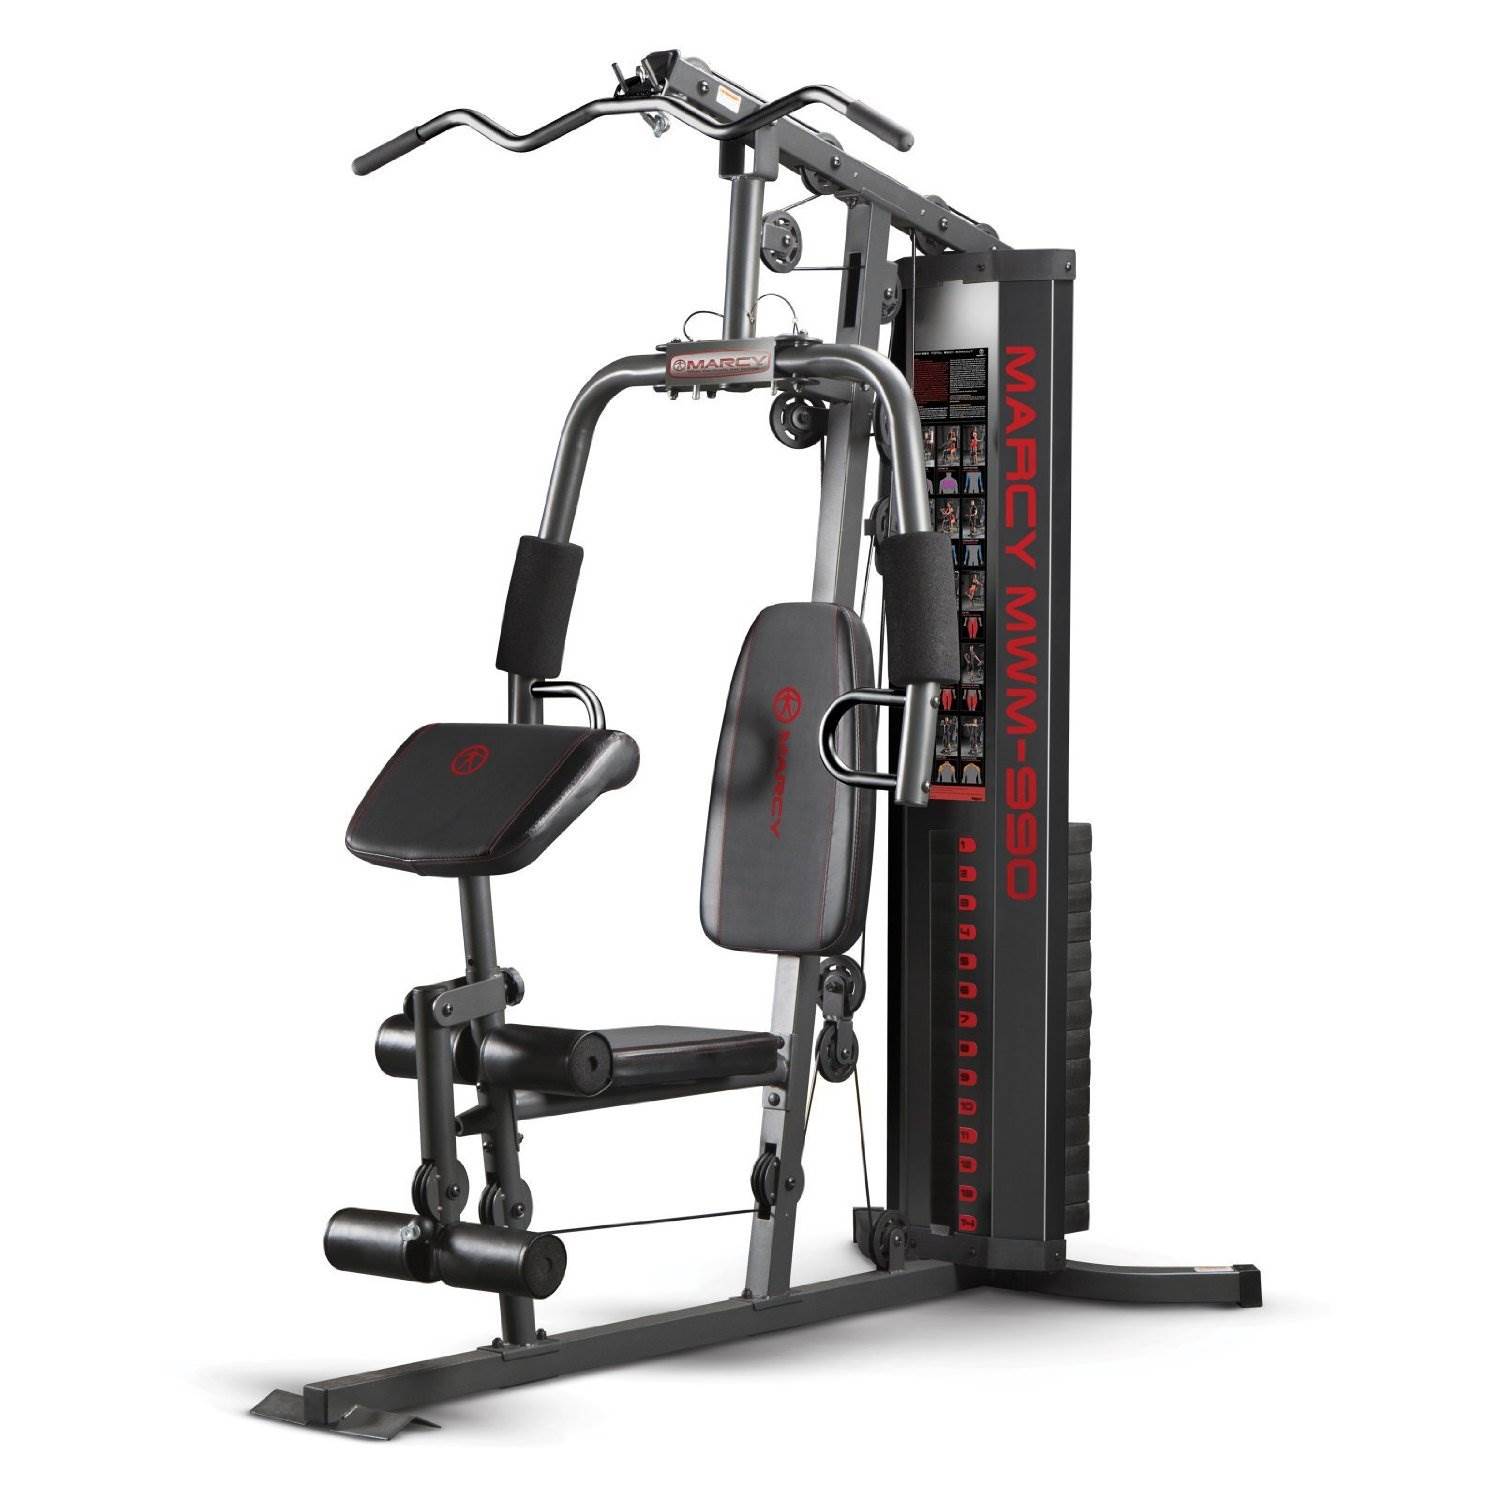 Marcy Dual-Functioning Full Body 150lb Stack Home Gym Workout Machine MWM-990 - image 1 of 7